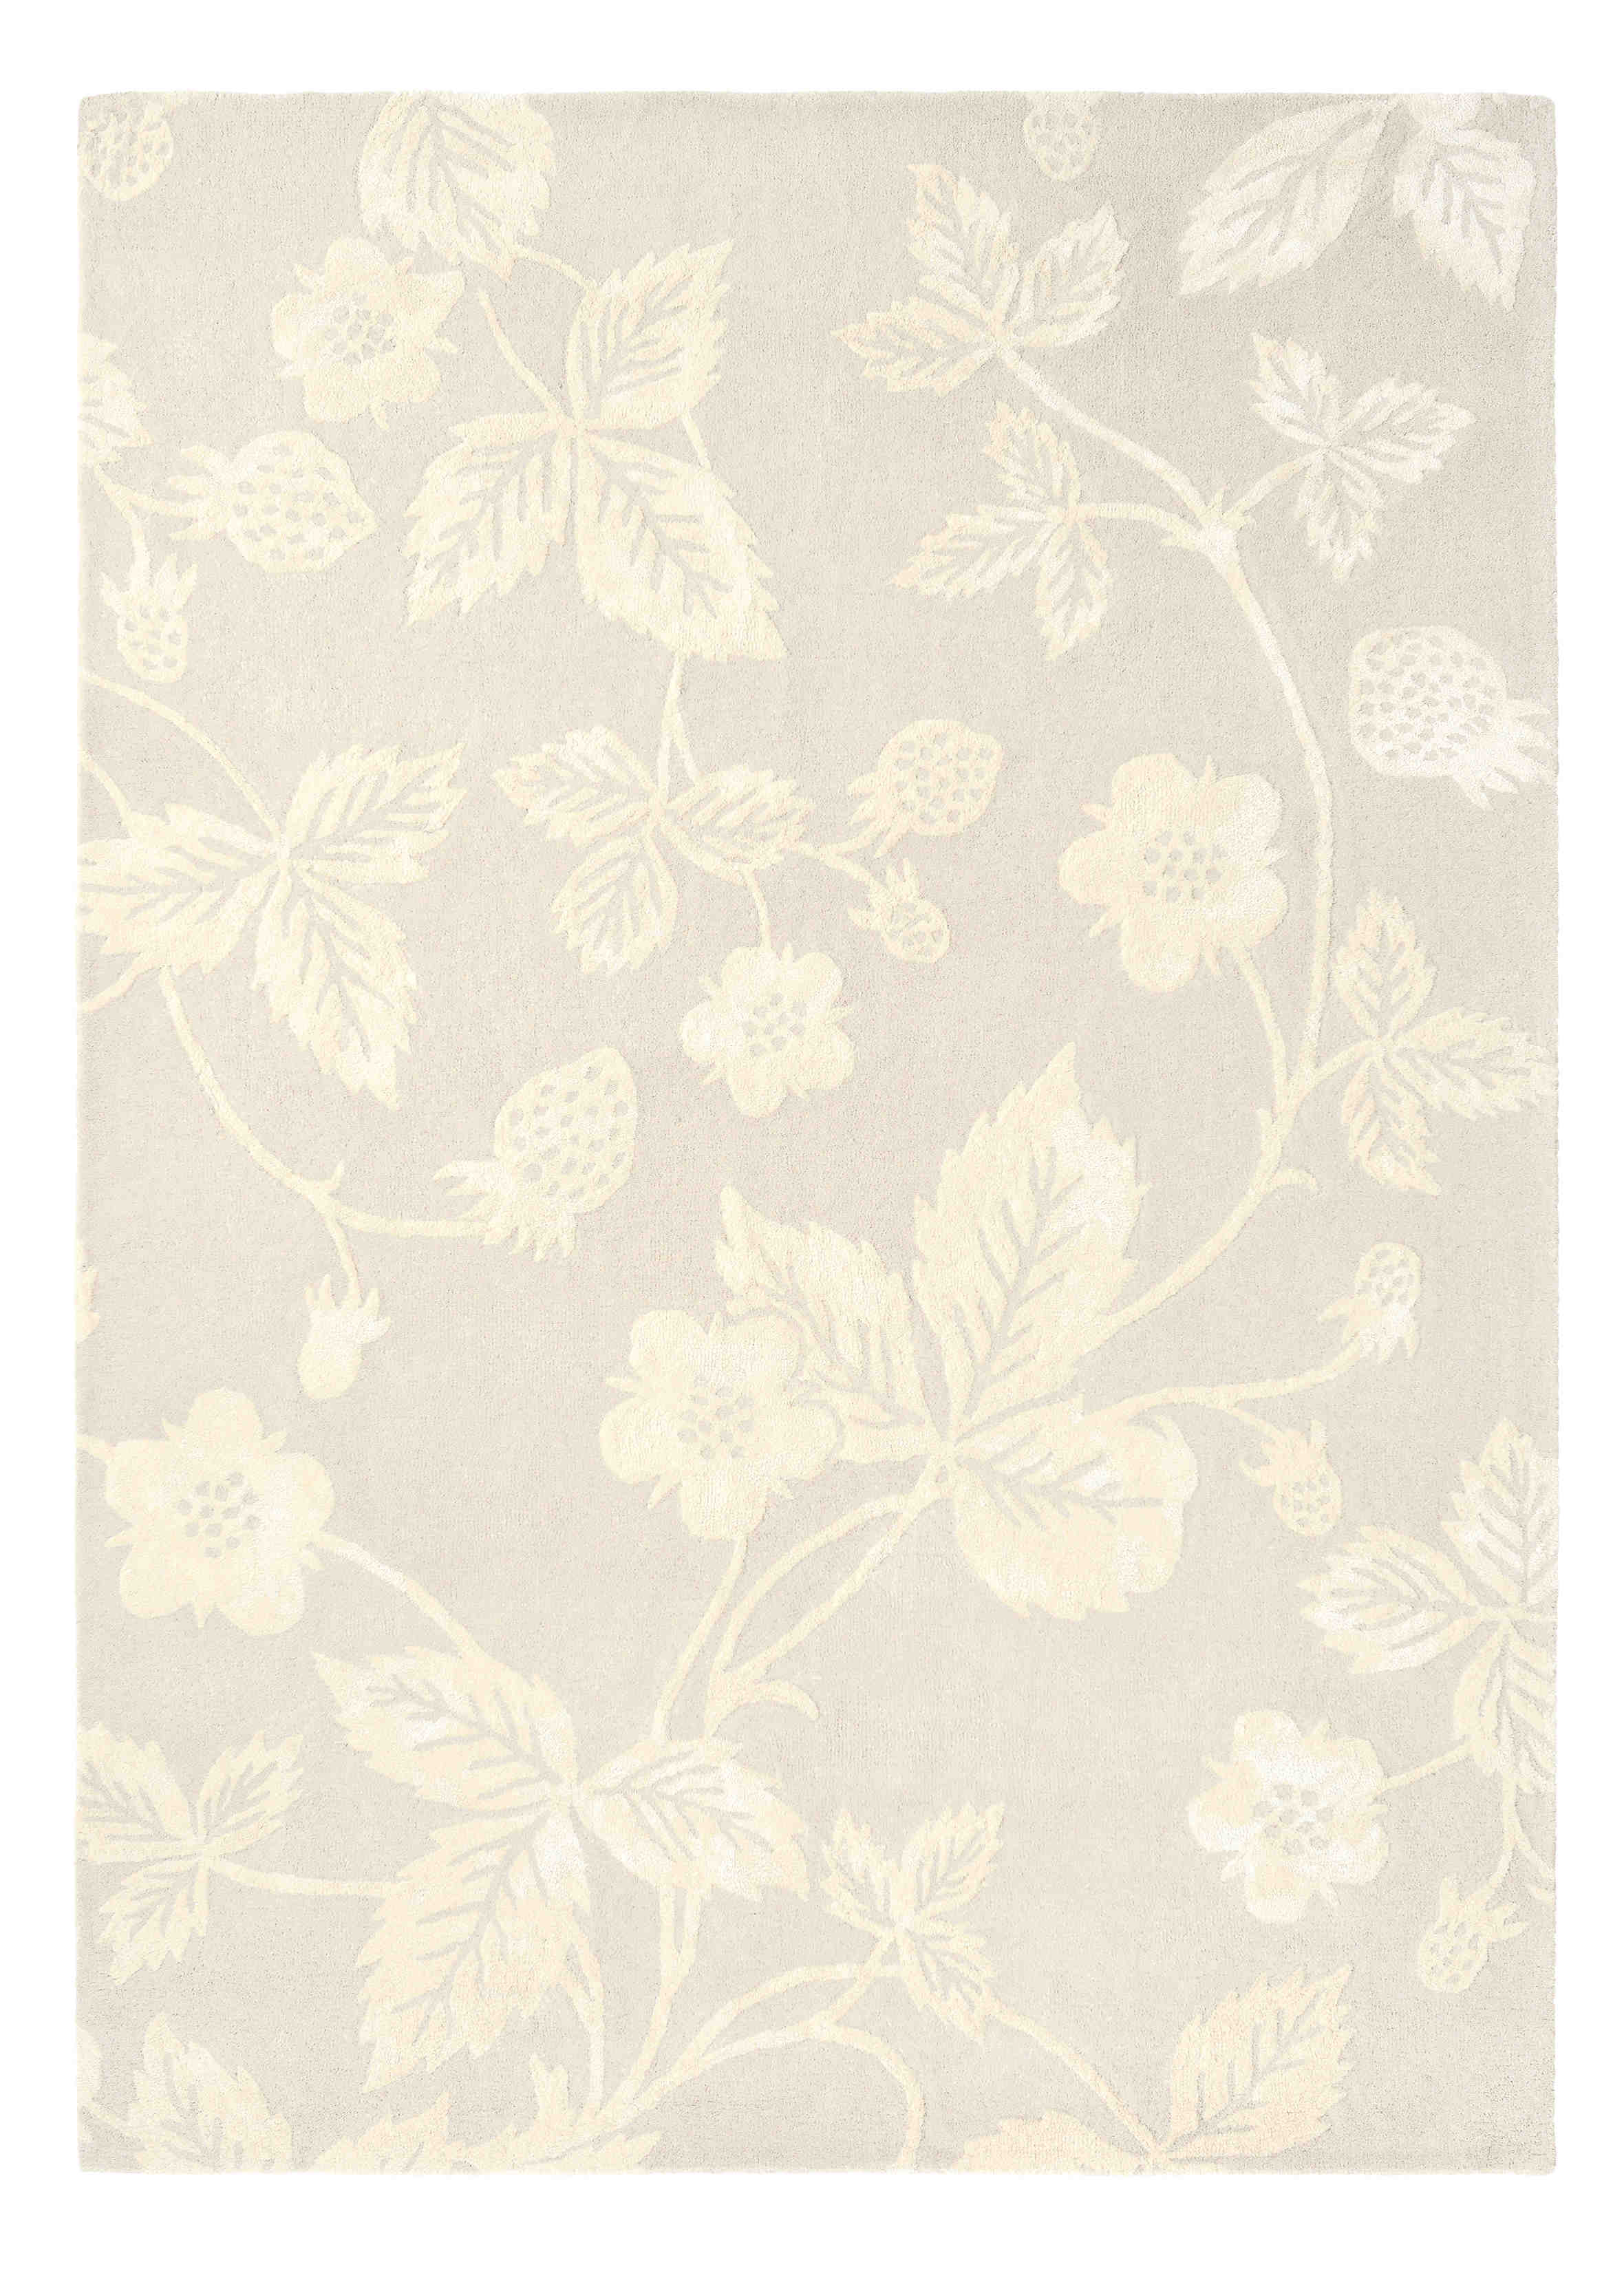 Rectangular taupe rug decorated with cream flowers, strawberries and leaves